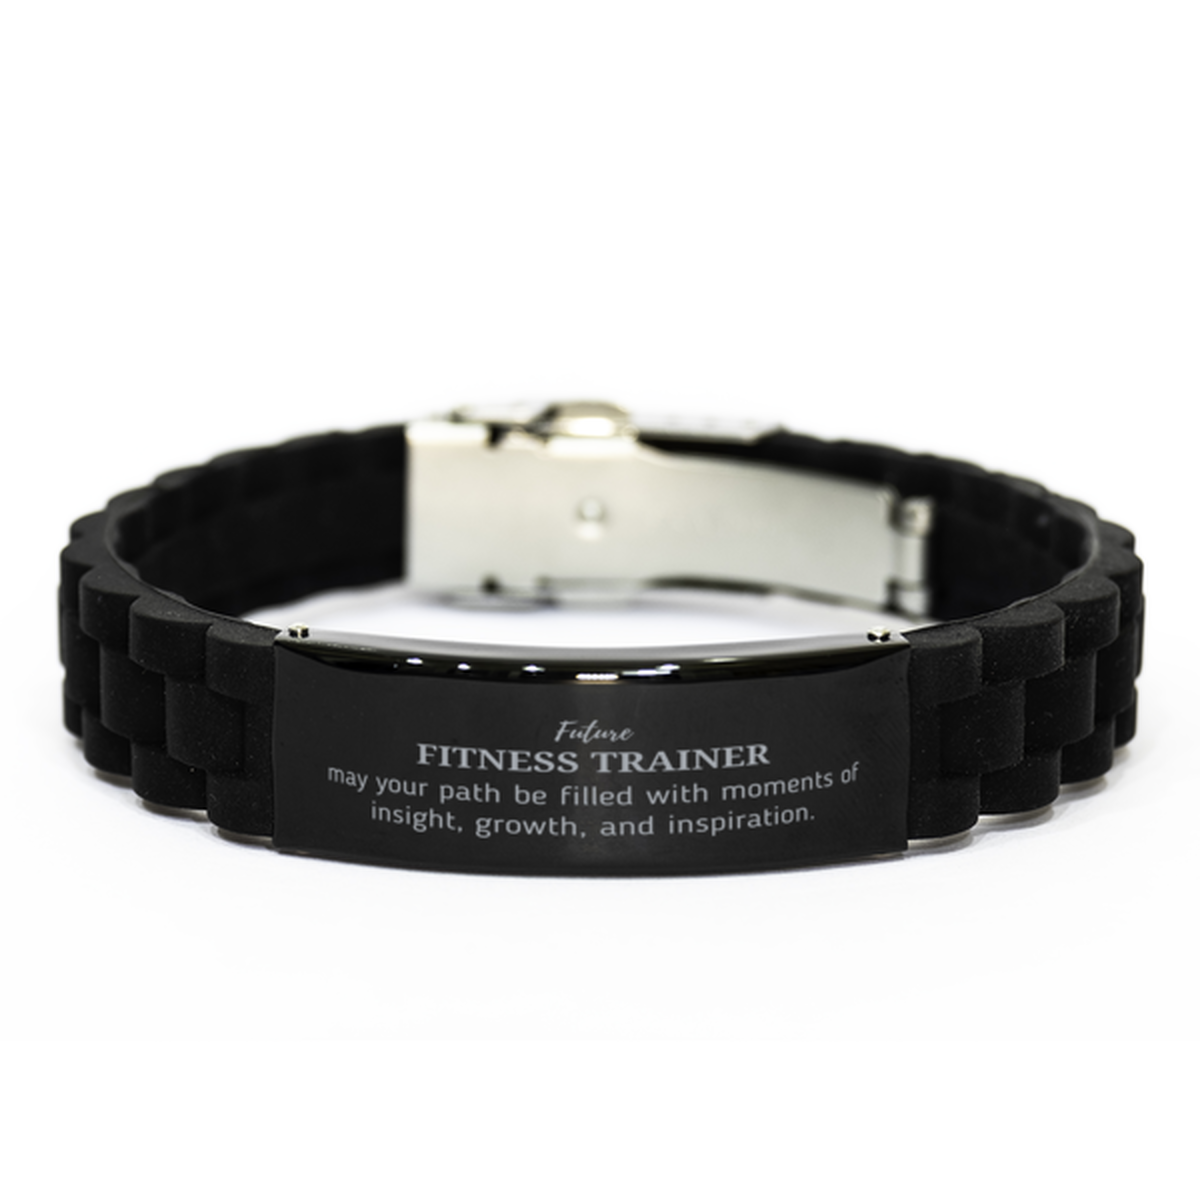 Future Fitness Trainer Gifts, May your path be filled with moments of insight, Graduation Gifts for New Fitness Trainer, Christmas Unique Black Glidelock Clasp Bracelet For Men, Women, Friends